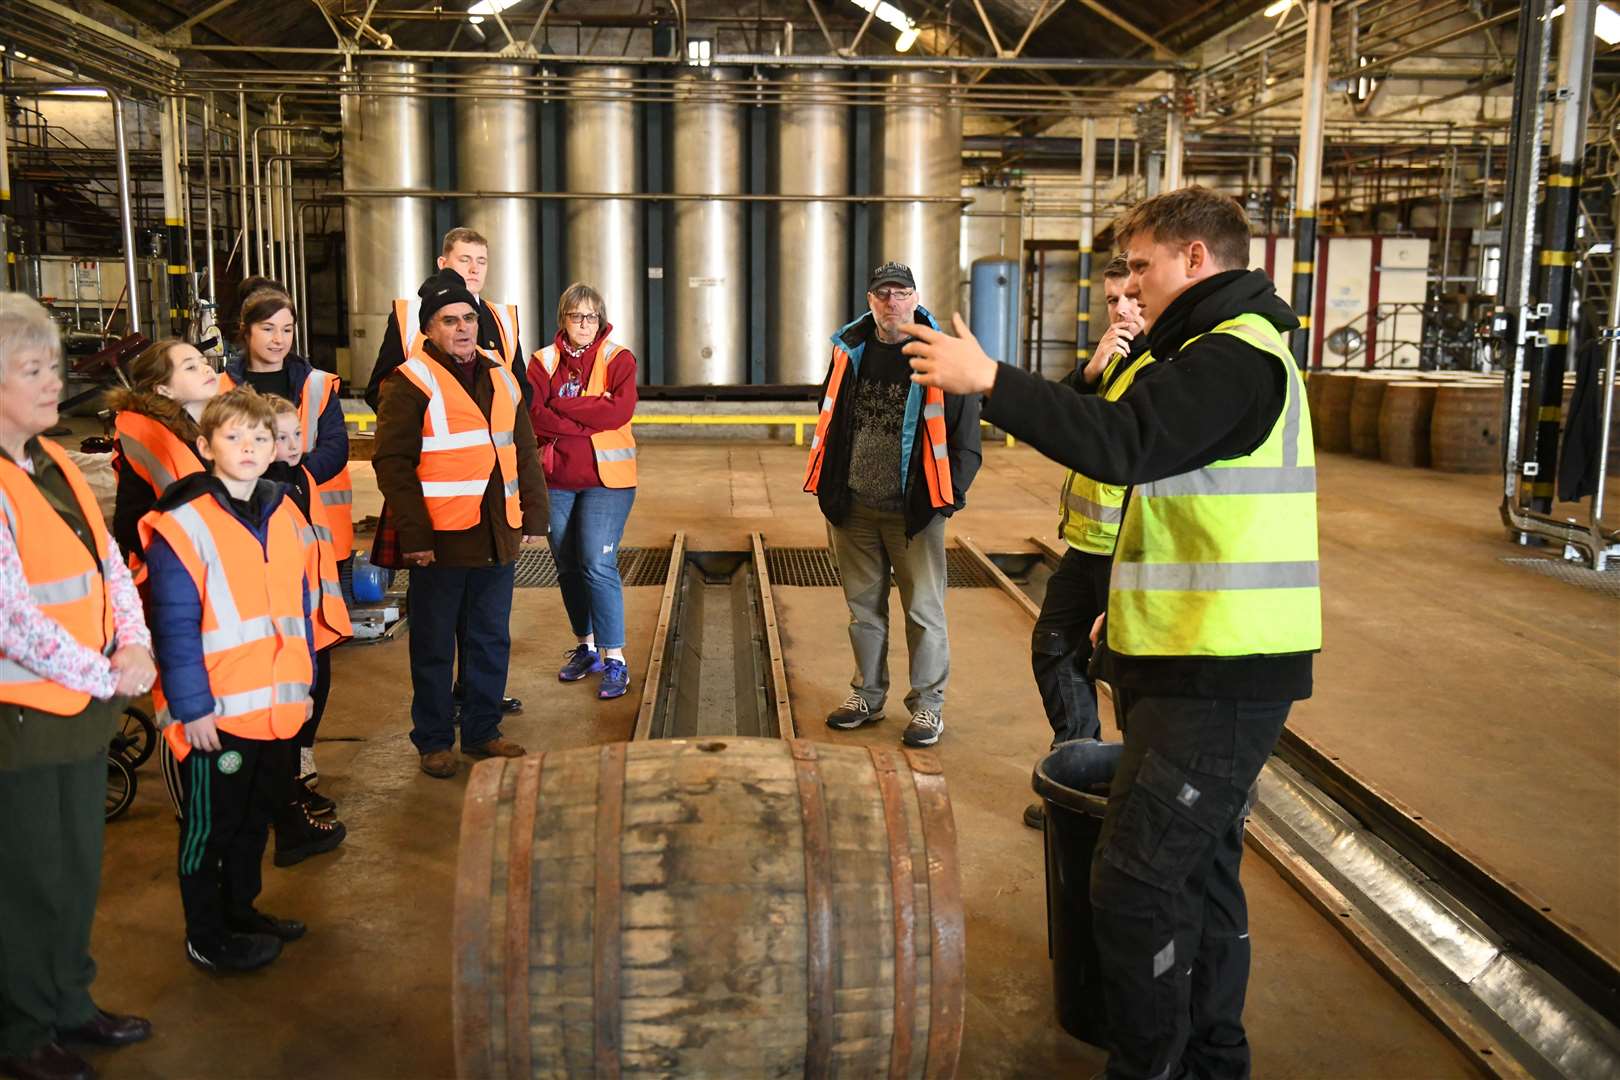 Alan Duff talking to a group about the casks. Picture: James Mackenzie.